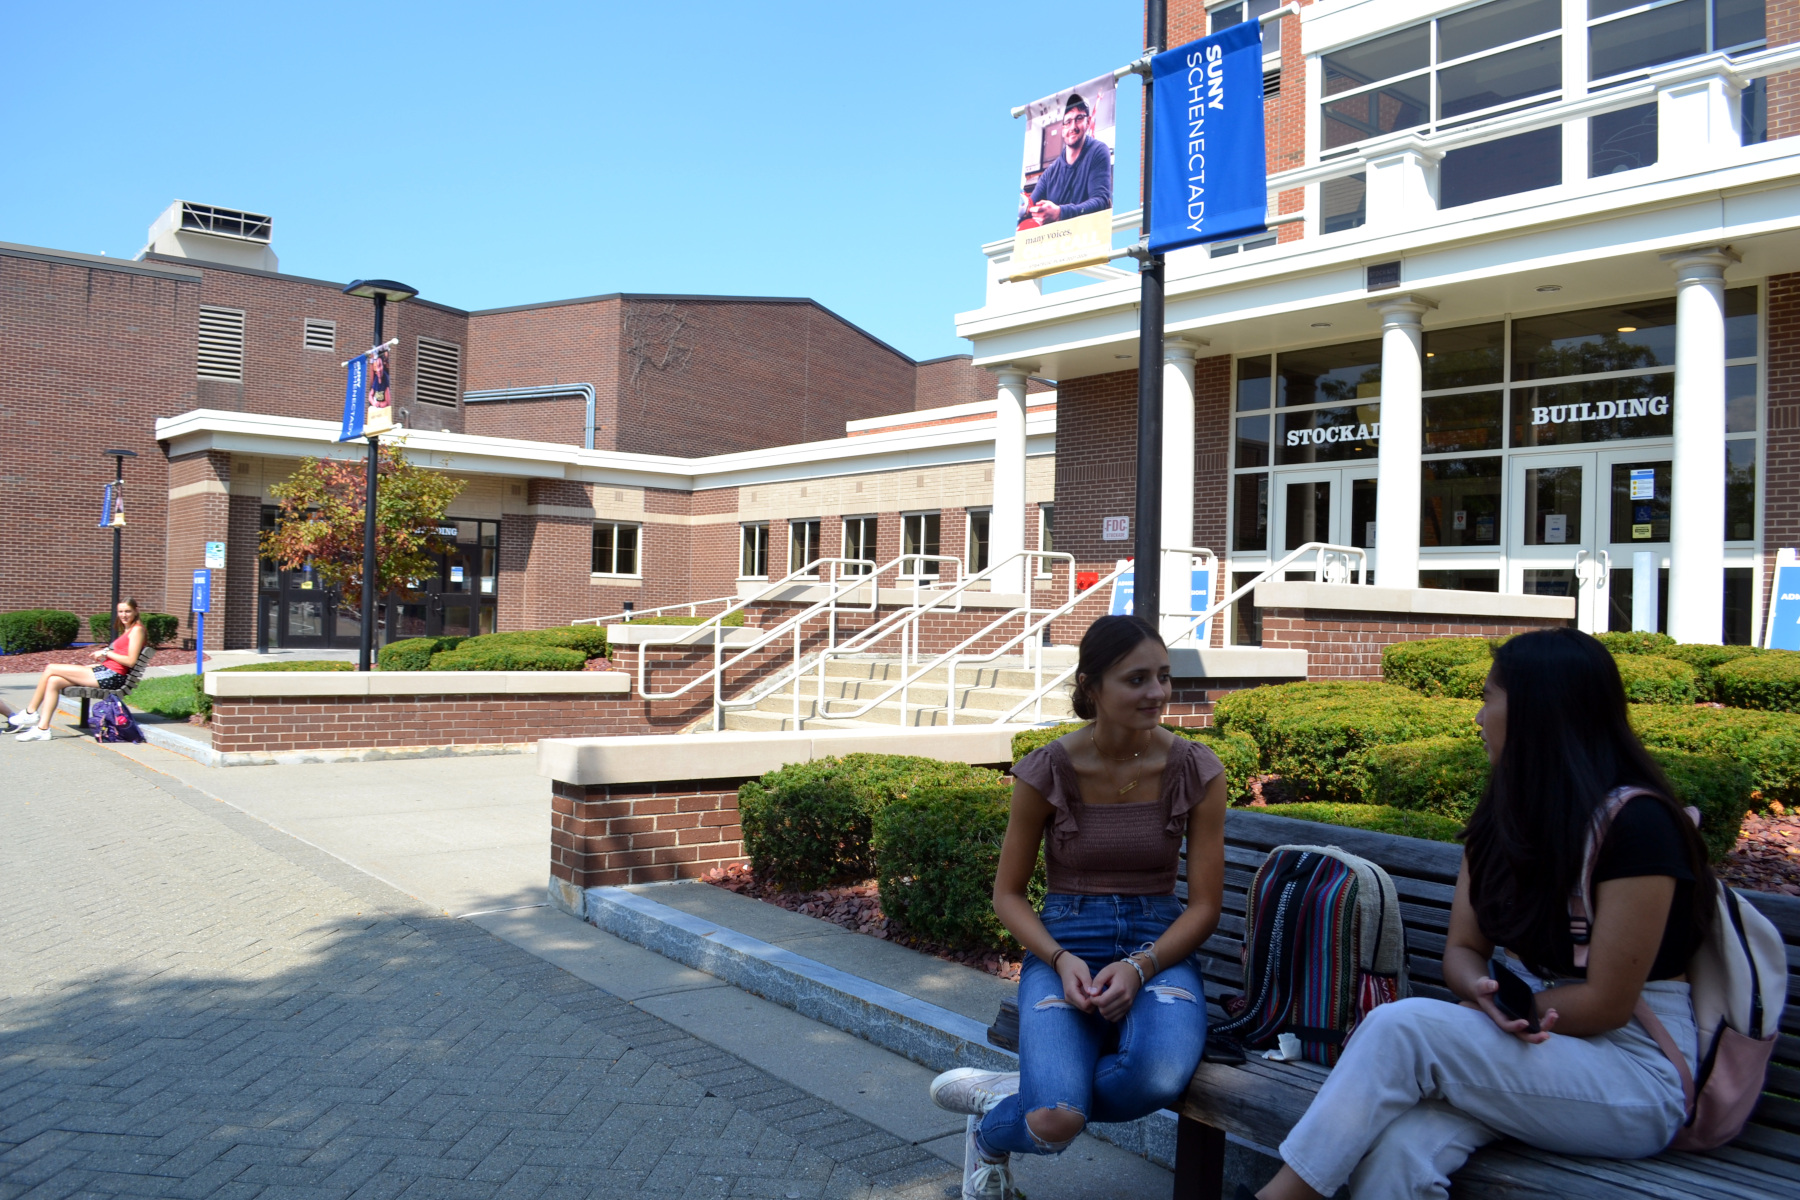 Students sitting on a bench in the quad